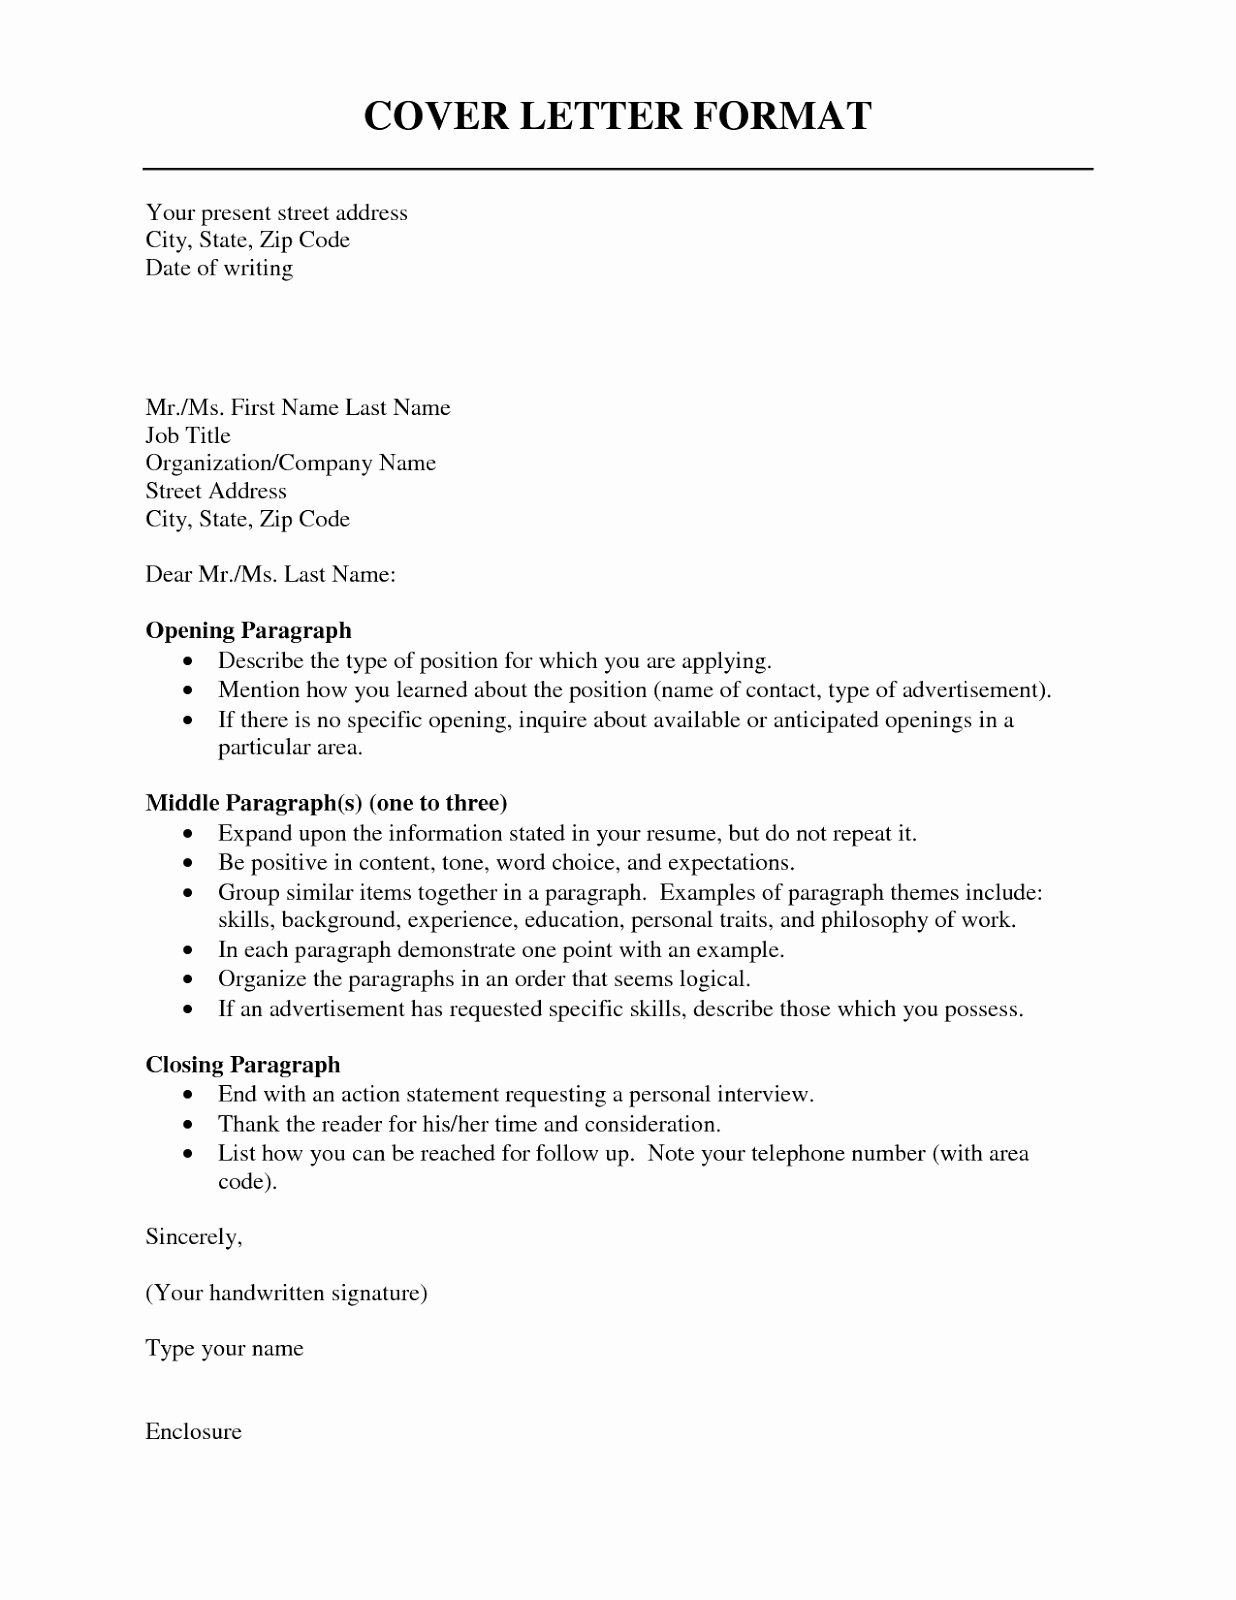 Resume and Cover Letter formats Inspirational Cover Letter format Resume Cv